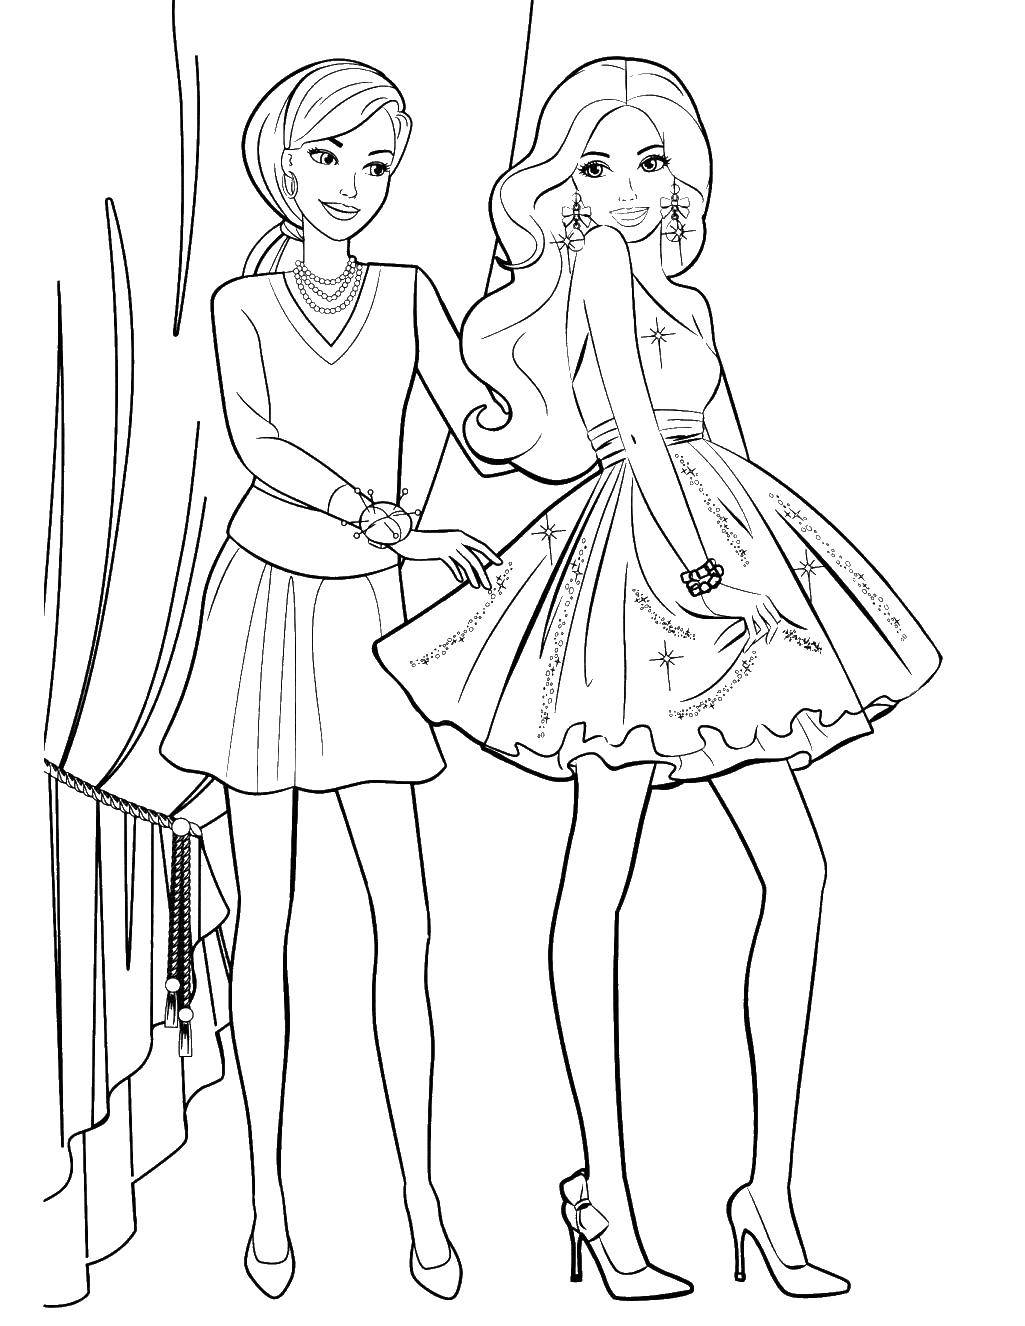 Coloring Two Barbie. Category Barbie . Tags:  Barbie , girls, dolls.